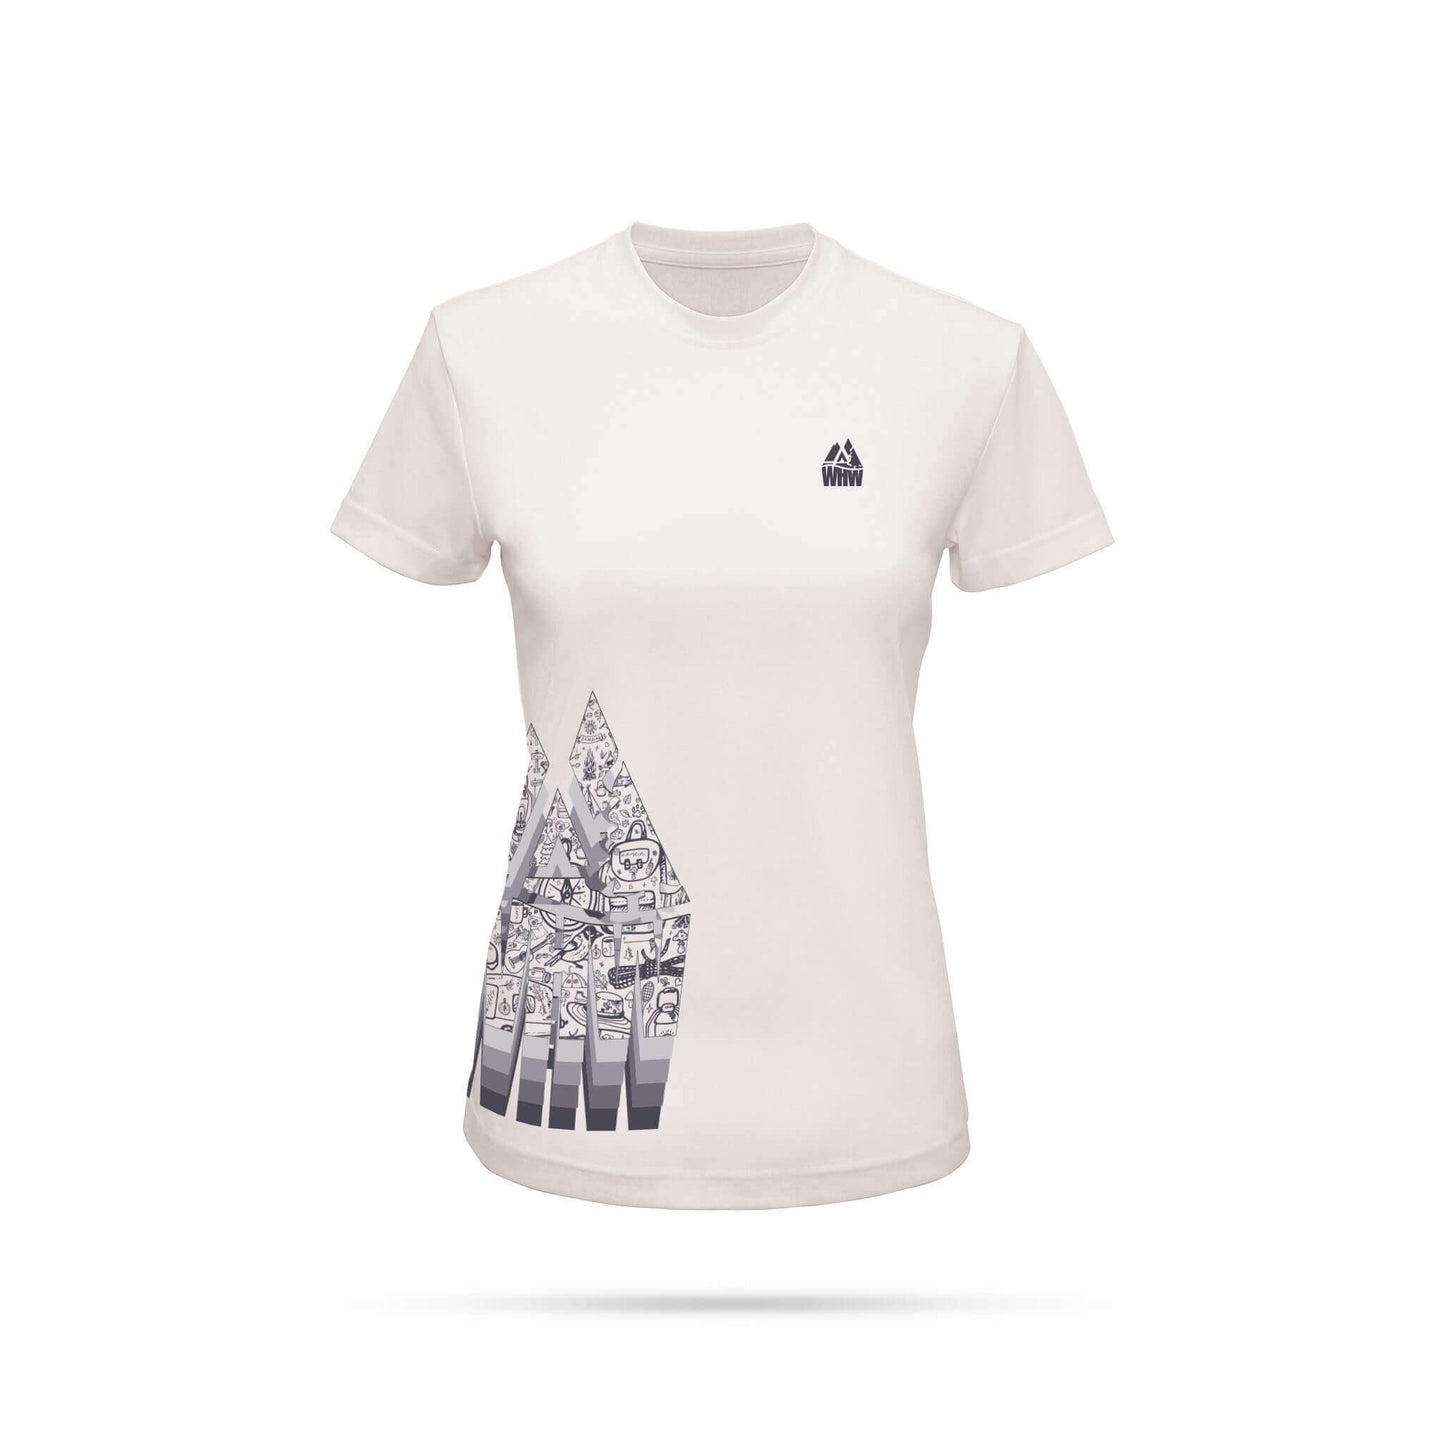 White fitted west highland way tri dri performance t-shirt